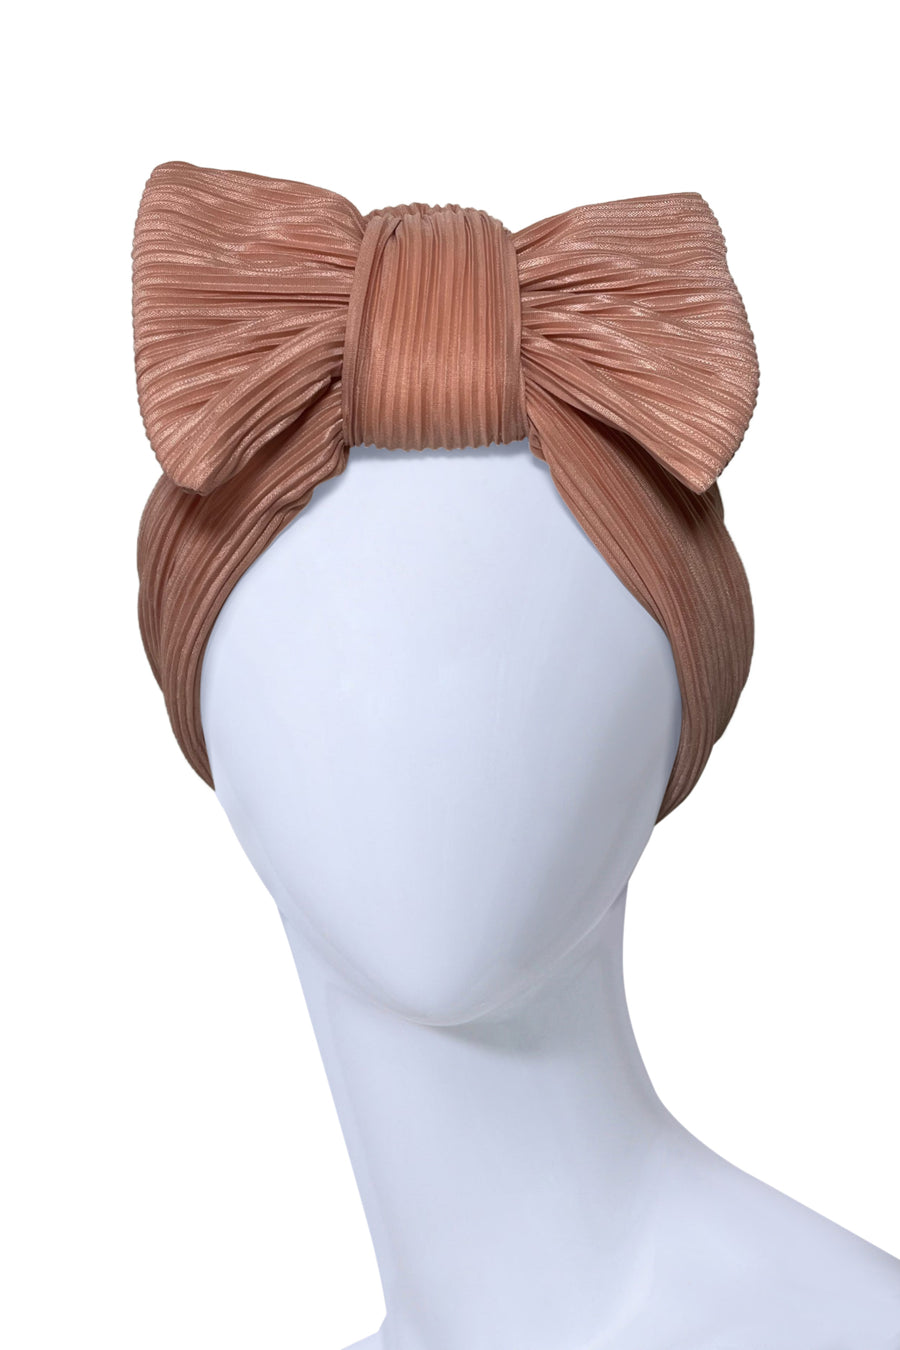 MONCEAU - NEW PINK TURBAN !